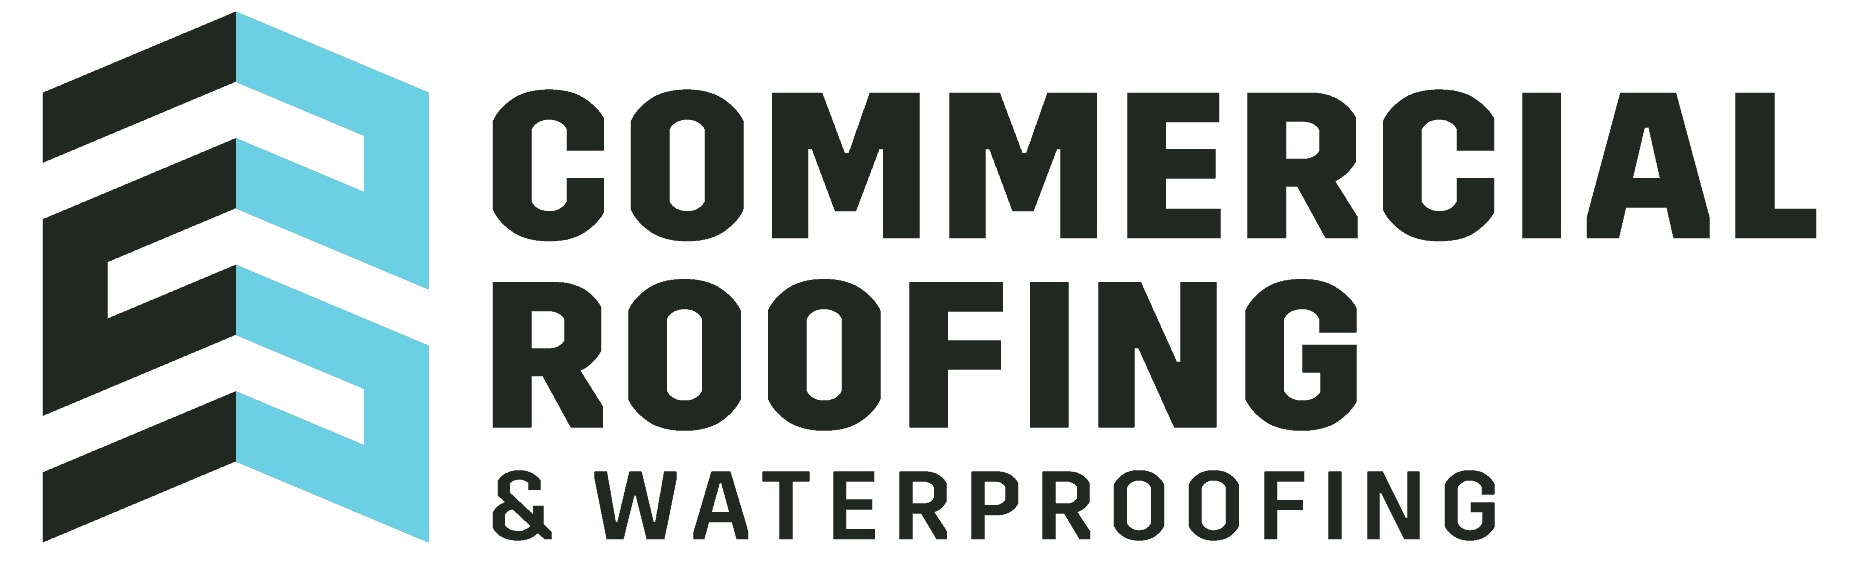 Commercial Roofing and Waterproofing Hawaii roofing company in Hawaii